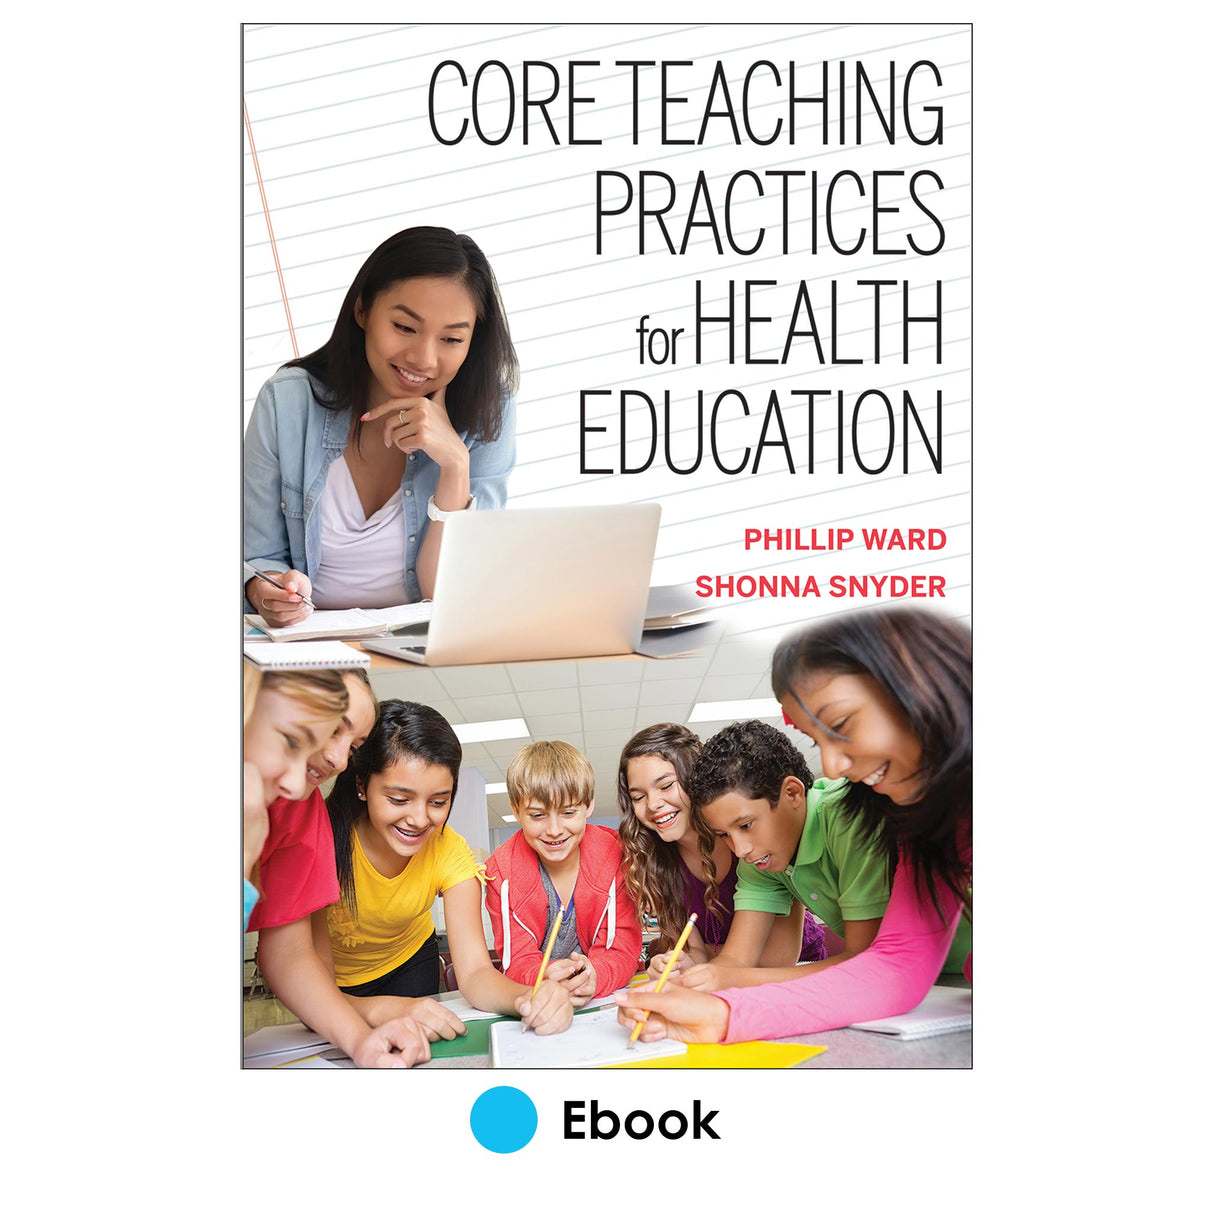 Core Teaching Practices for Health Education epub